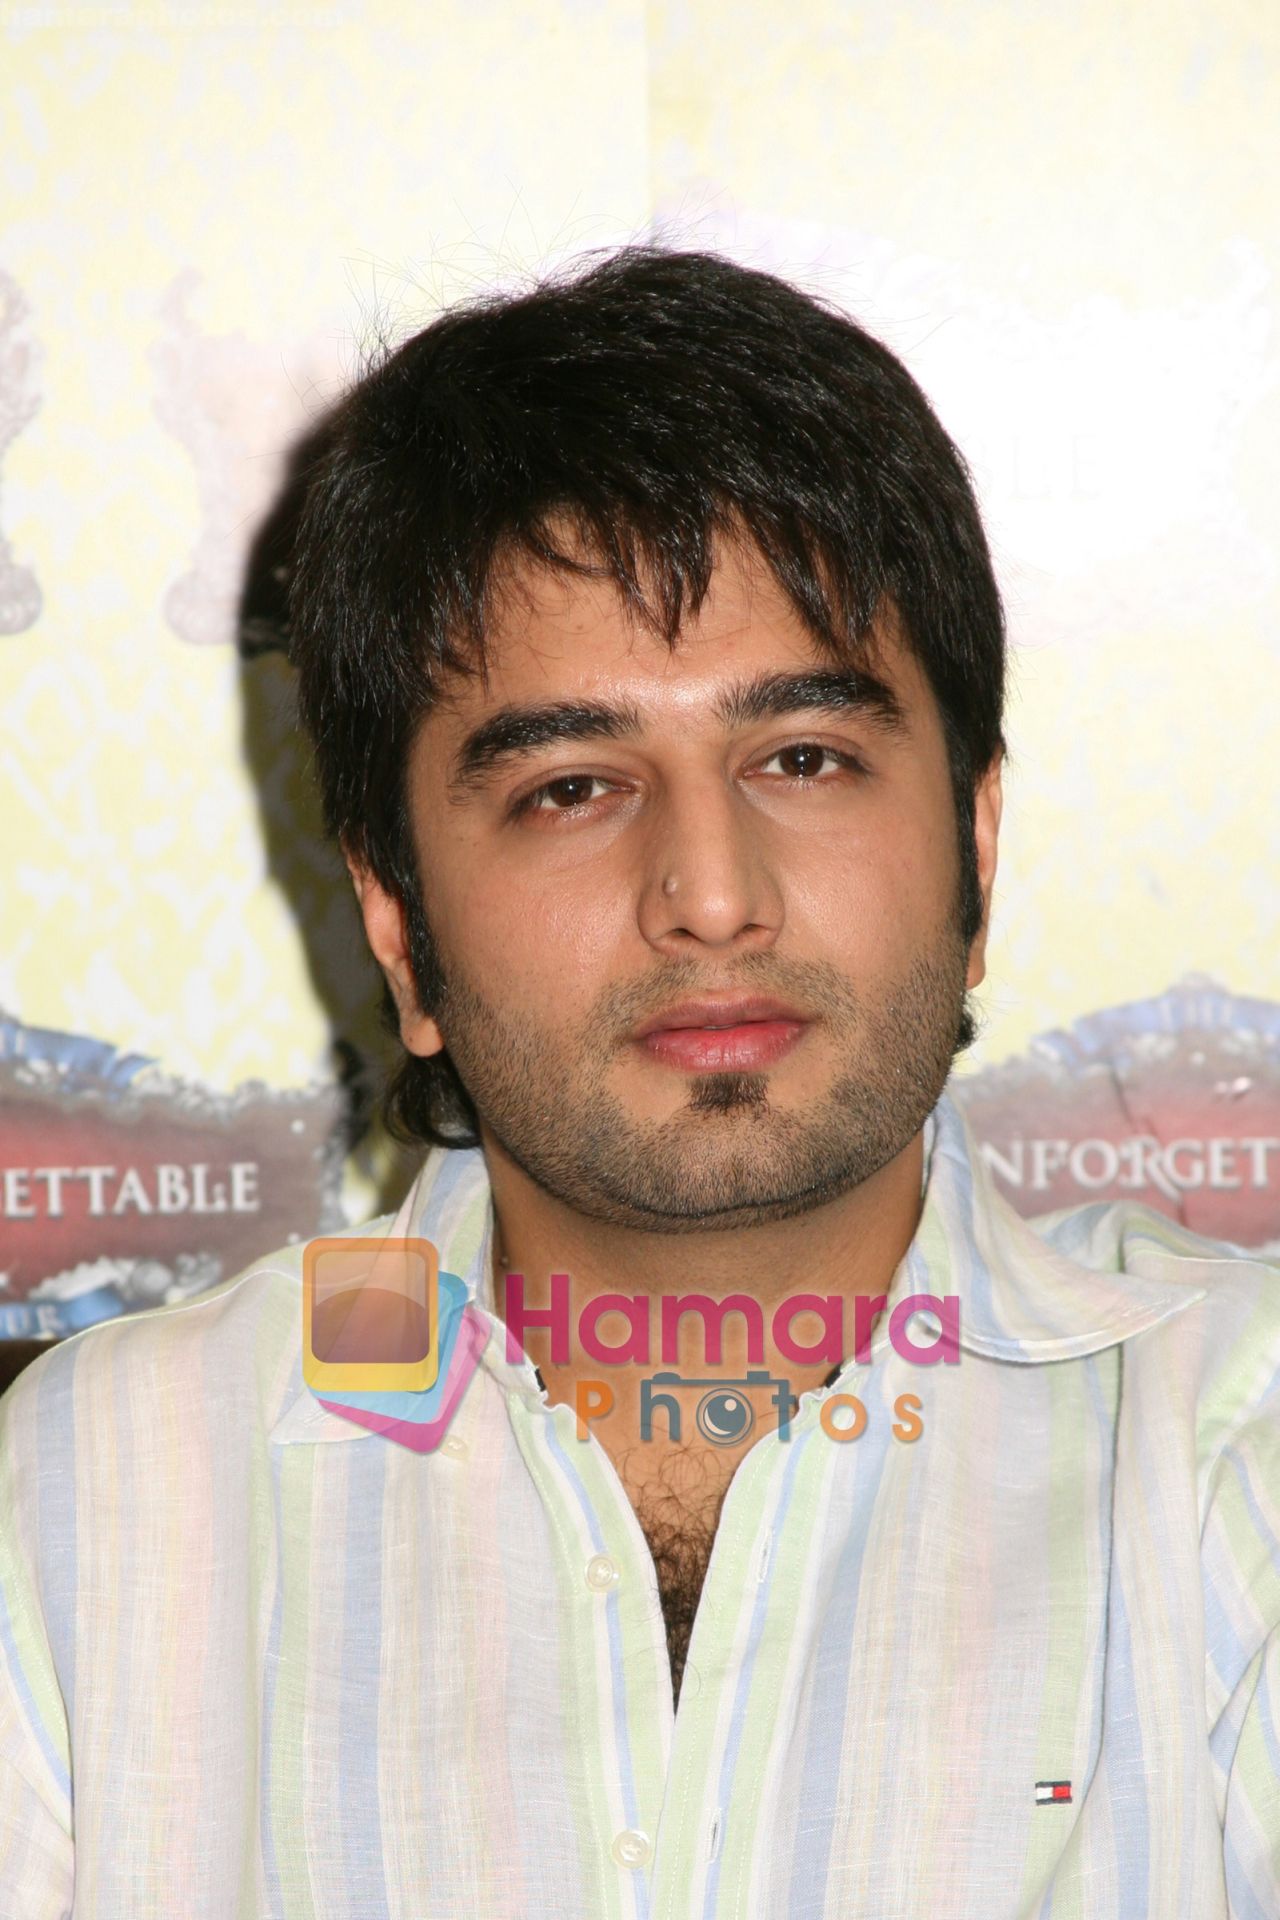 Shekhar at The Unforgettable Tour in Sunset Marquis Hotel on July 24th 2008 